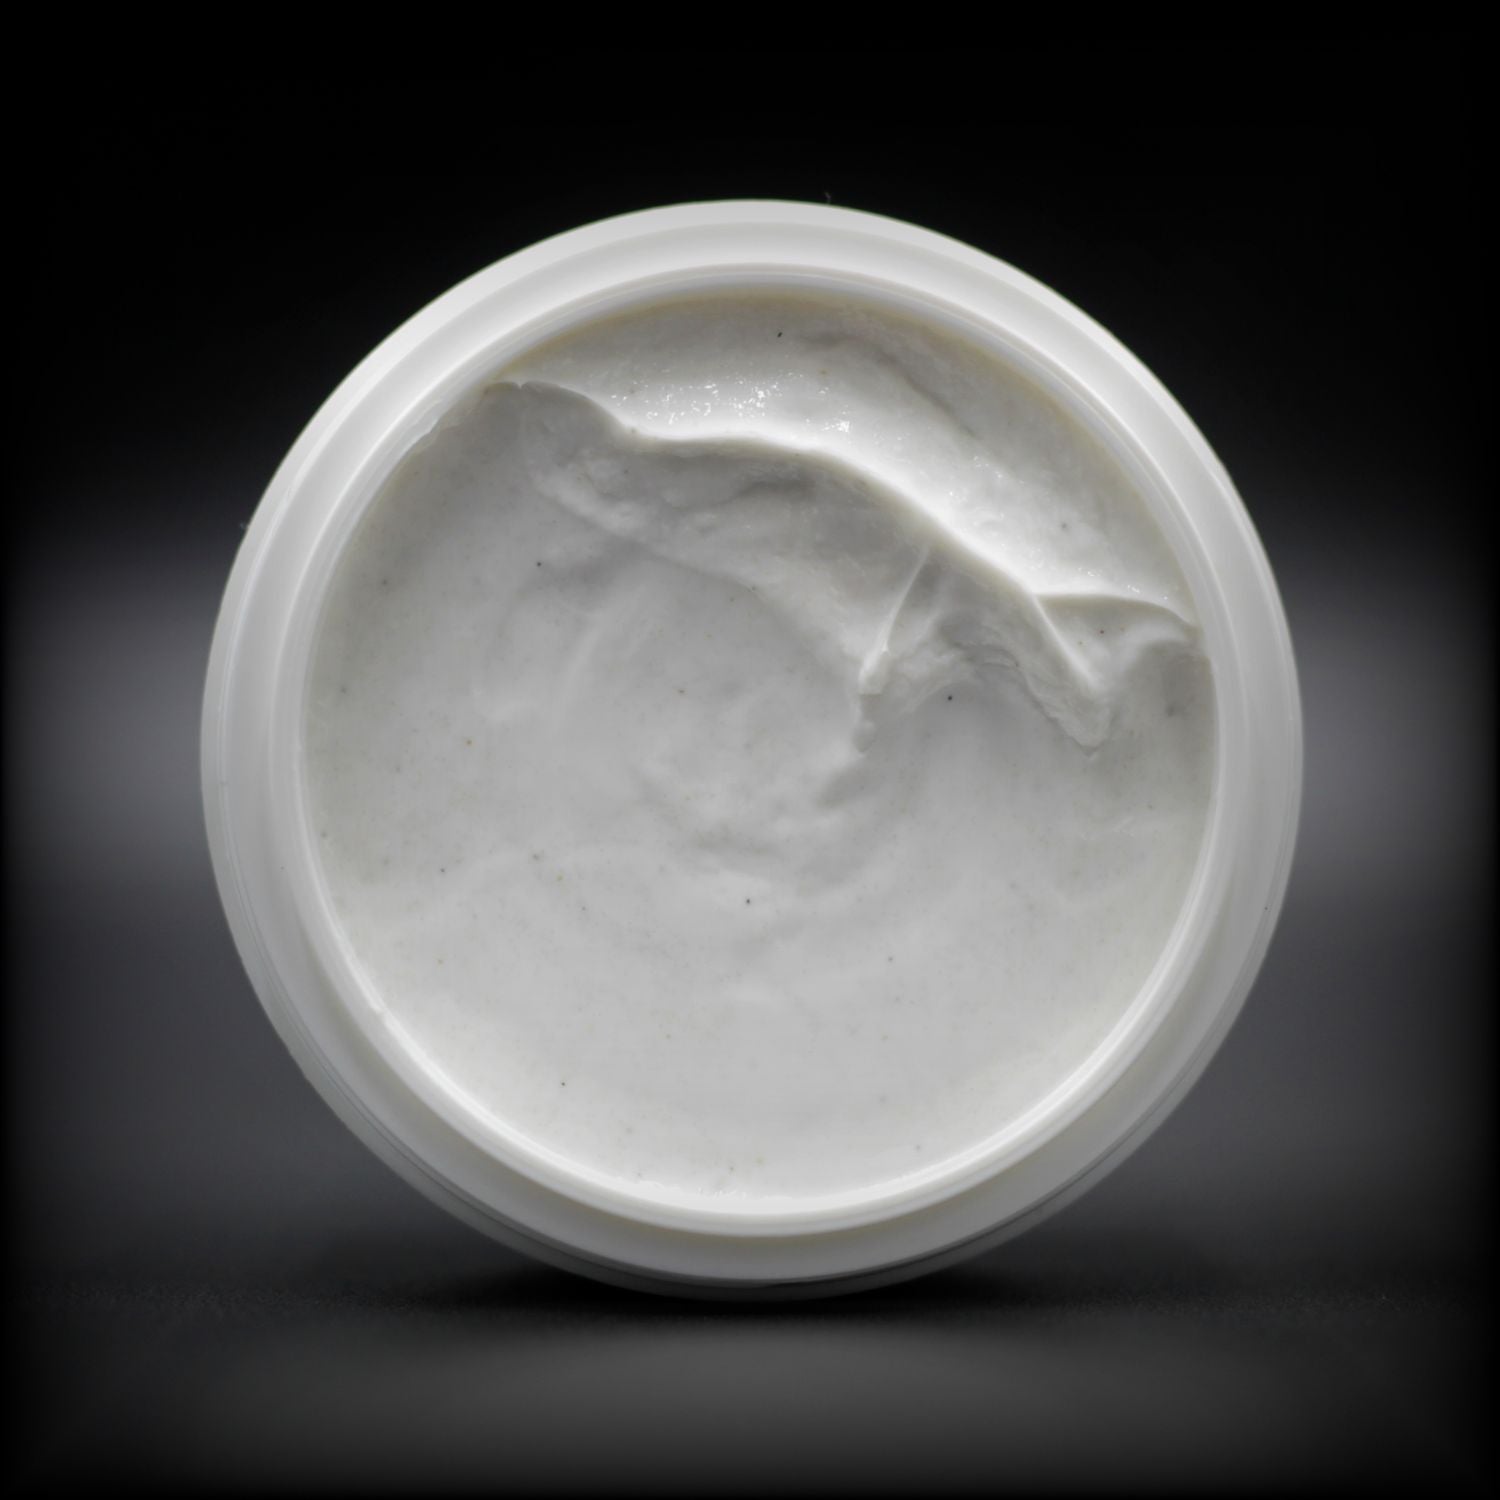 Naturally Wicked Volcanic Hand & Foot Scrub Inner Tub Showing Exfoliating White Cream With Volcanic Rock Inside